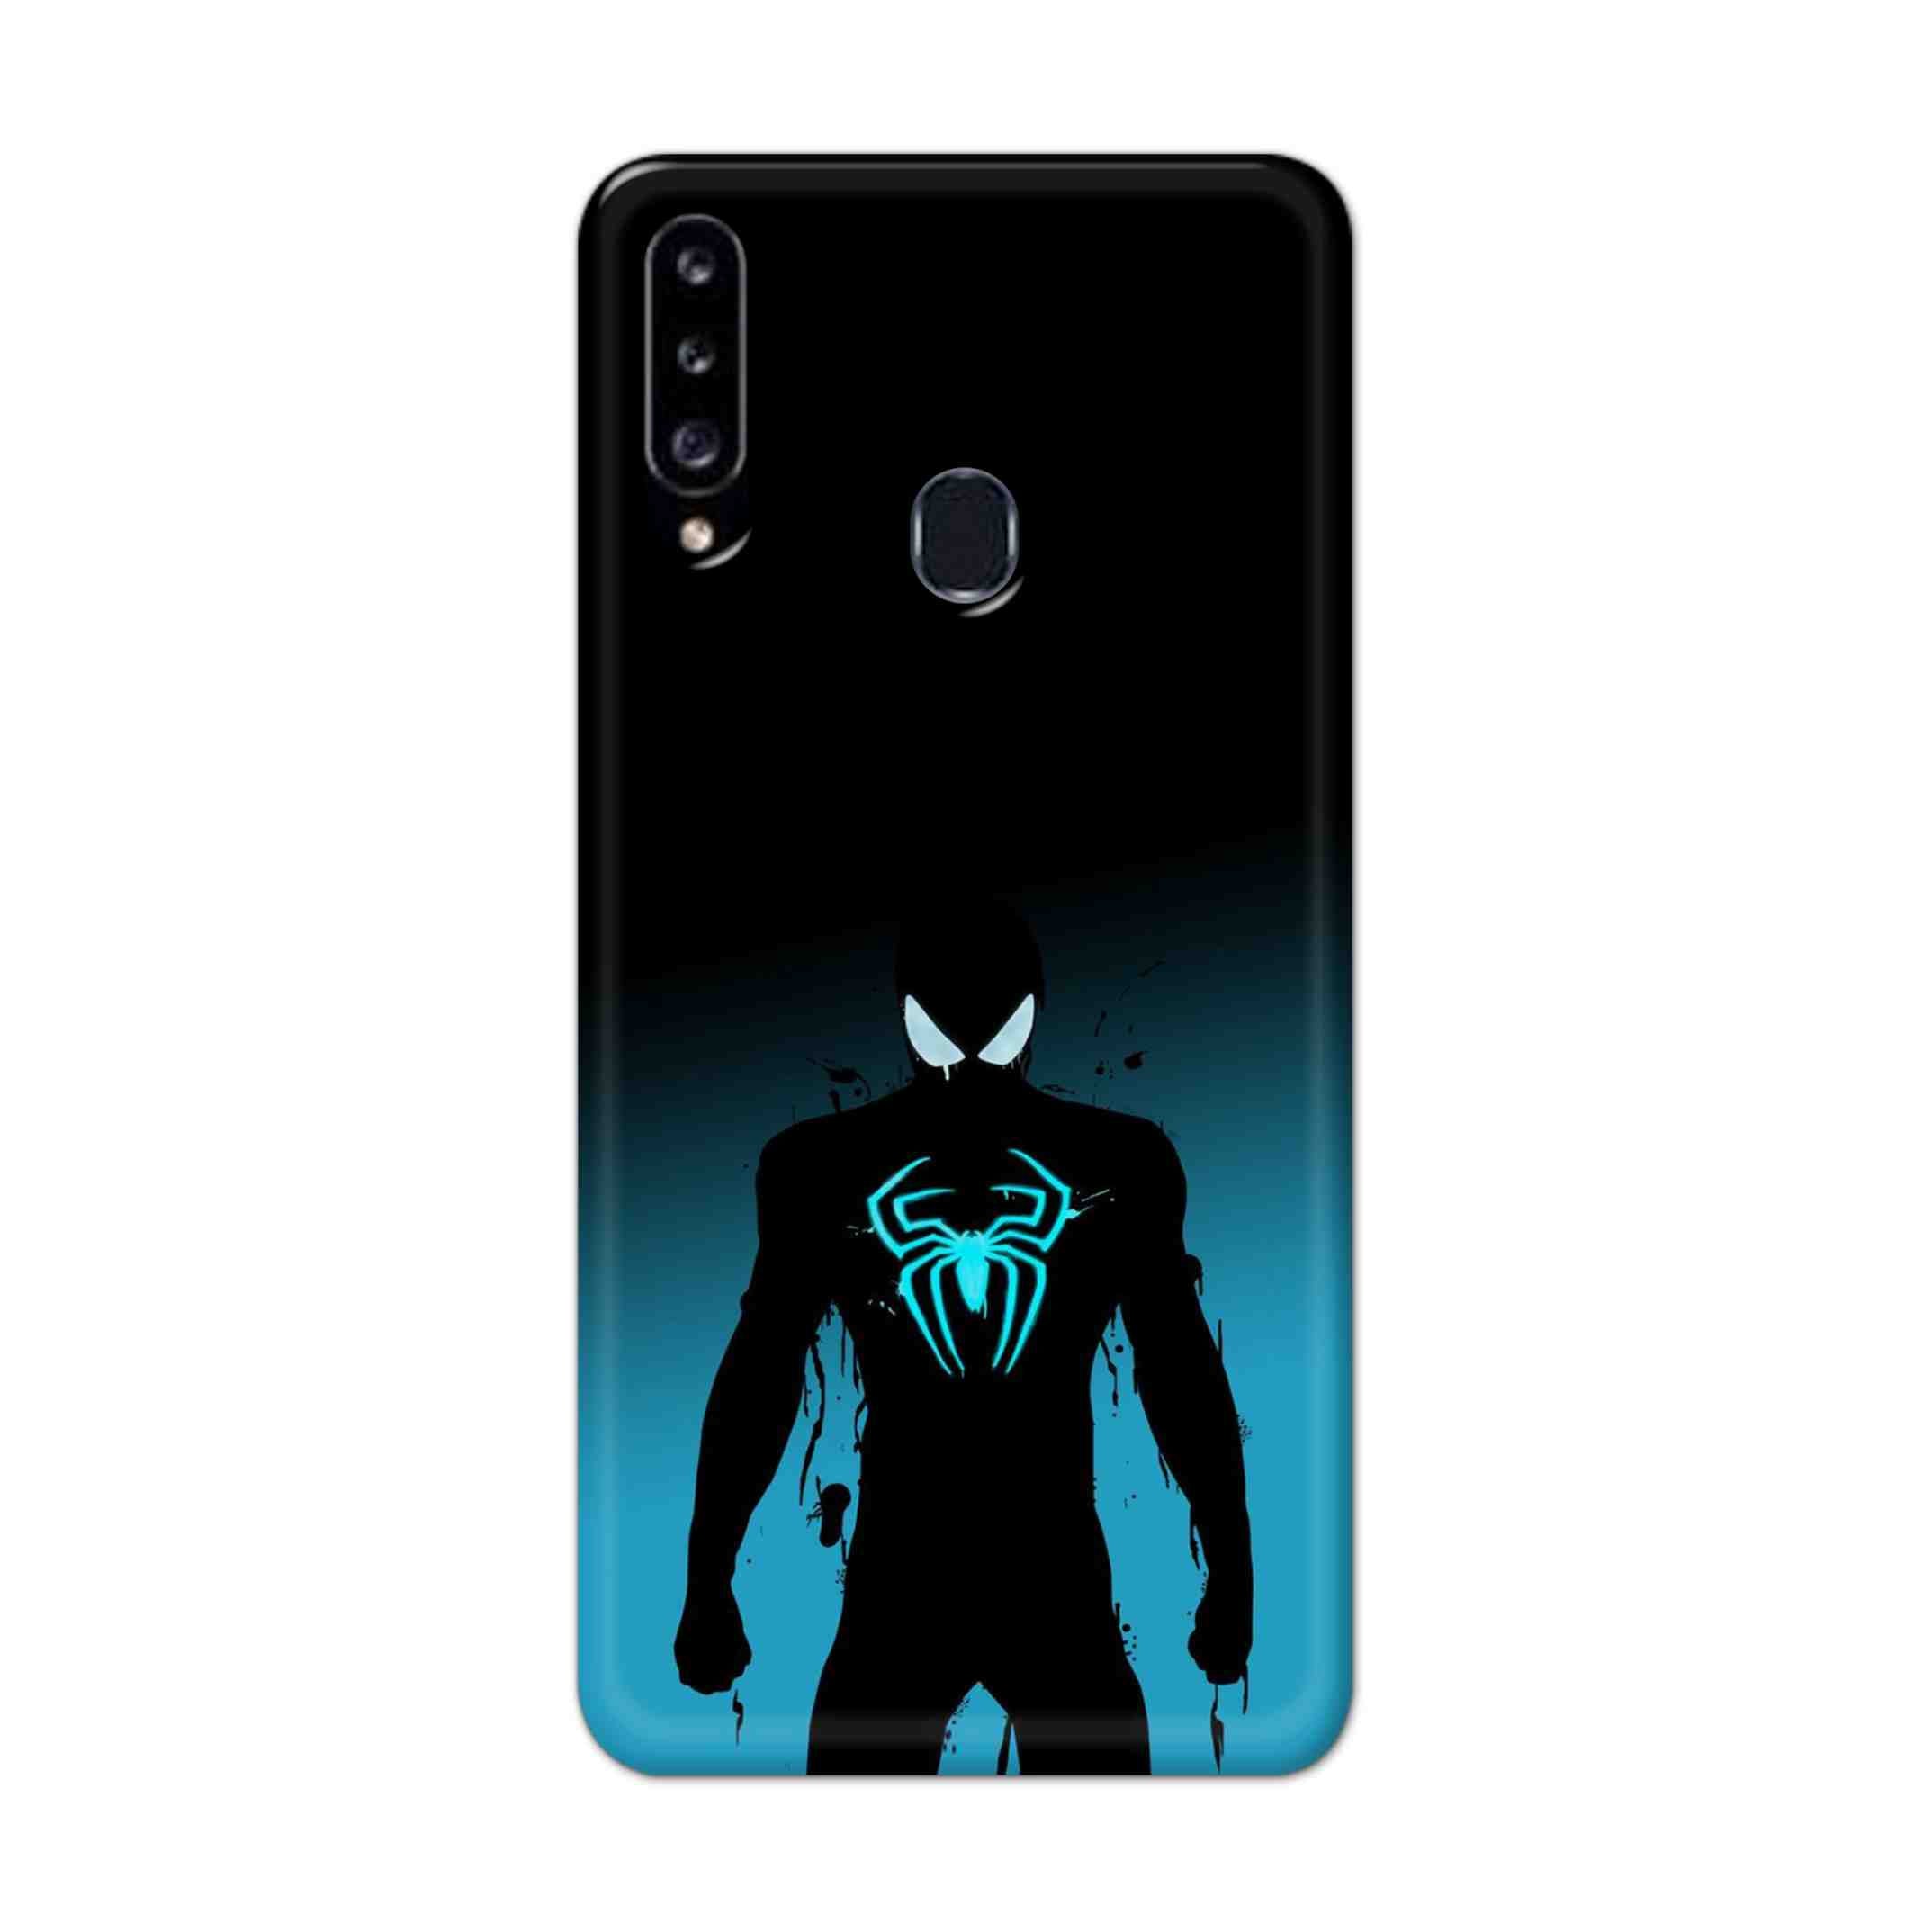 Buy Neon Spiderman Hard Back Mobile Phone Case Cover For Samsung Galaxy A21 Online